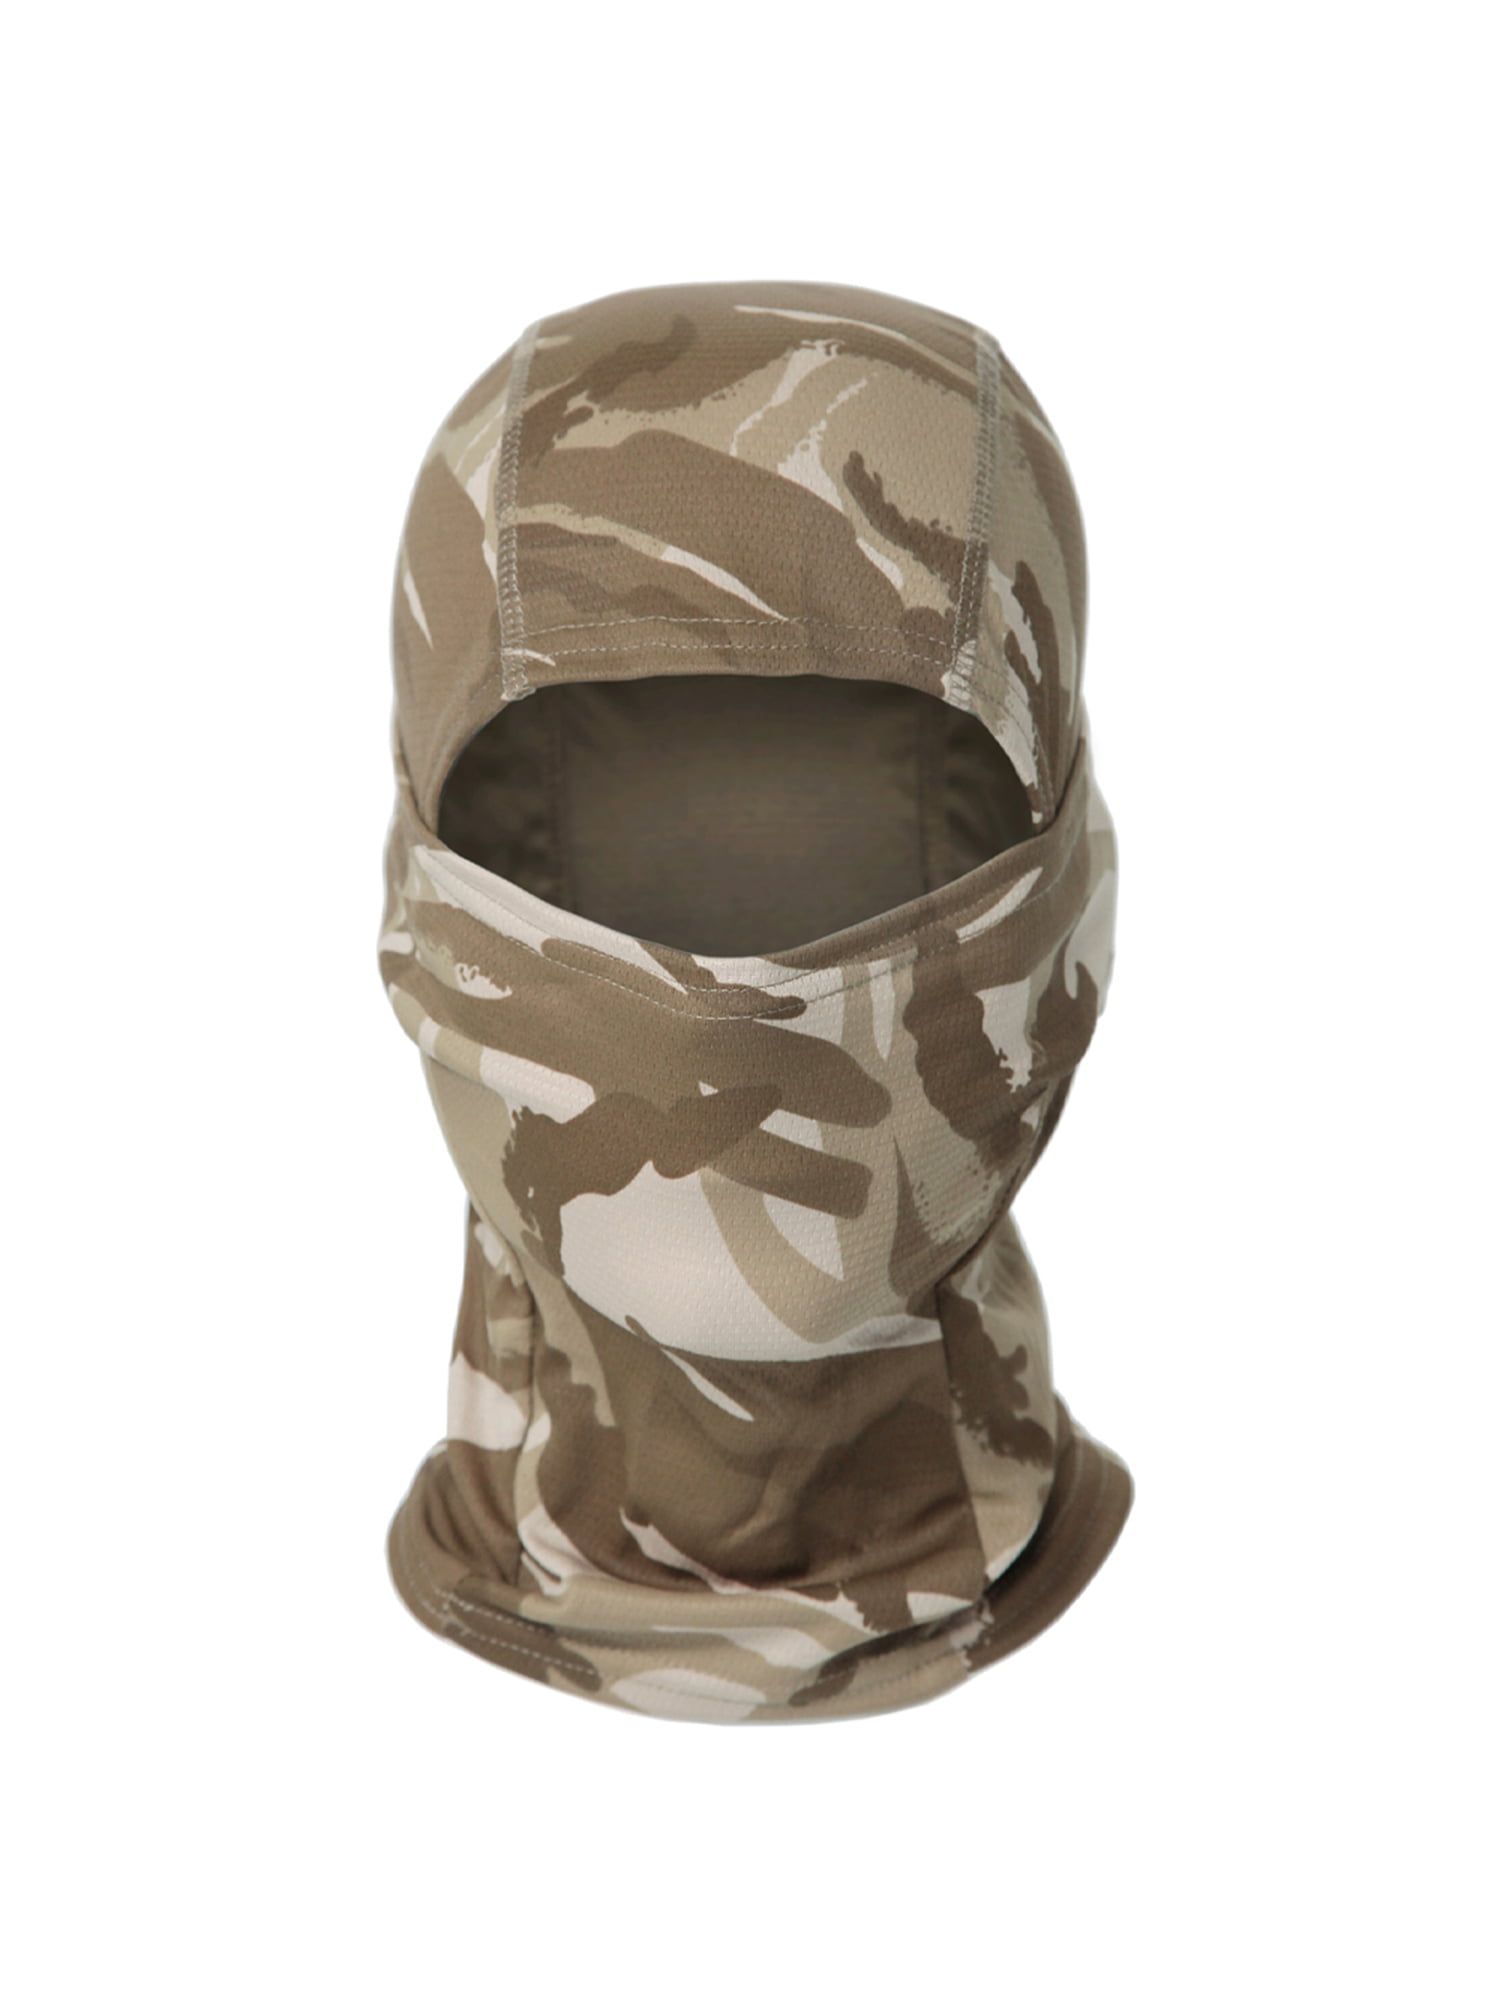 Details about   Army Military Tactical Camo Hat Hunting Balaclava Men Face Cover Airsoft Sniper 